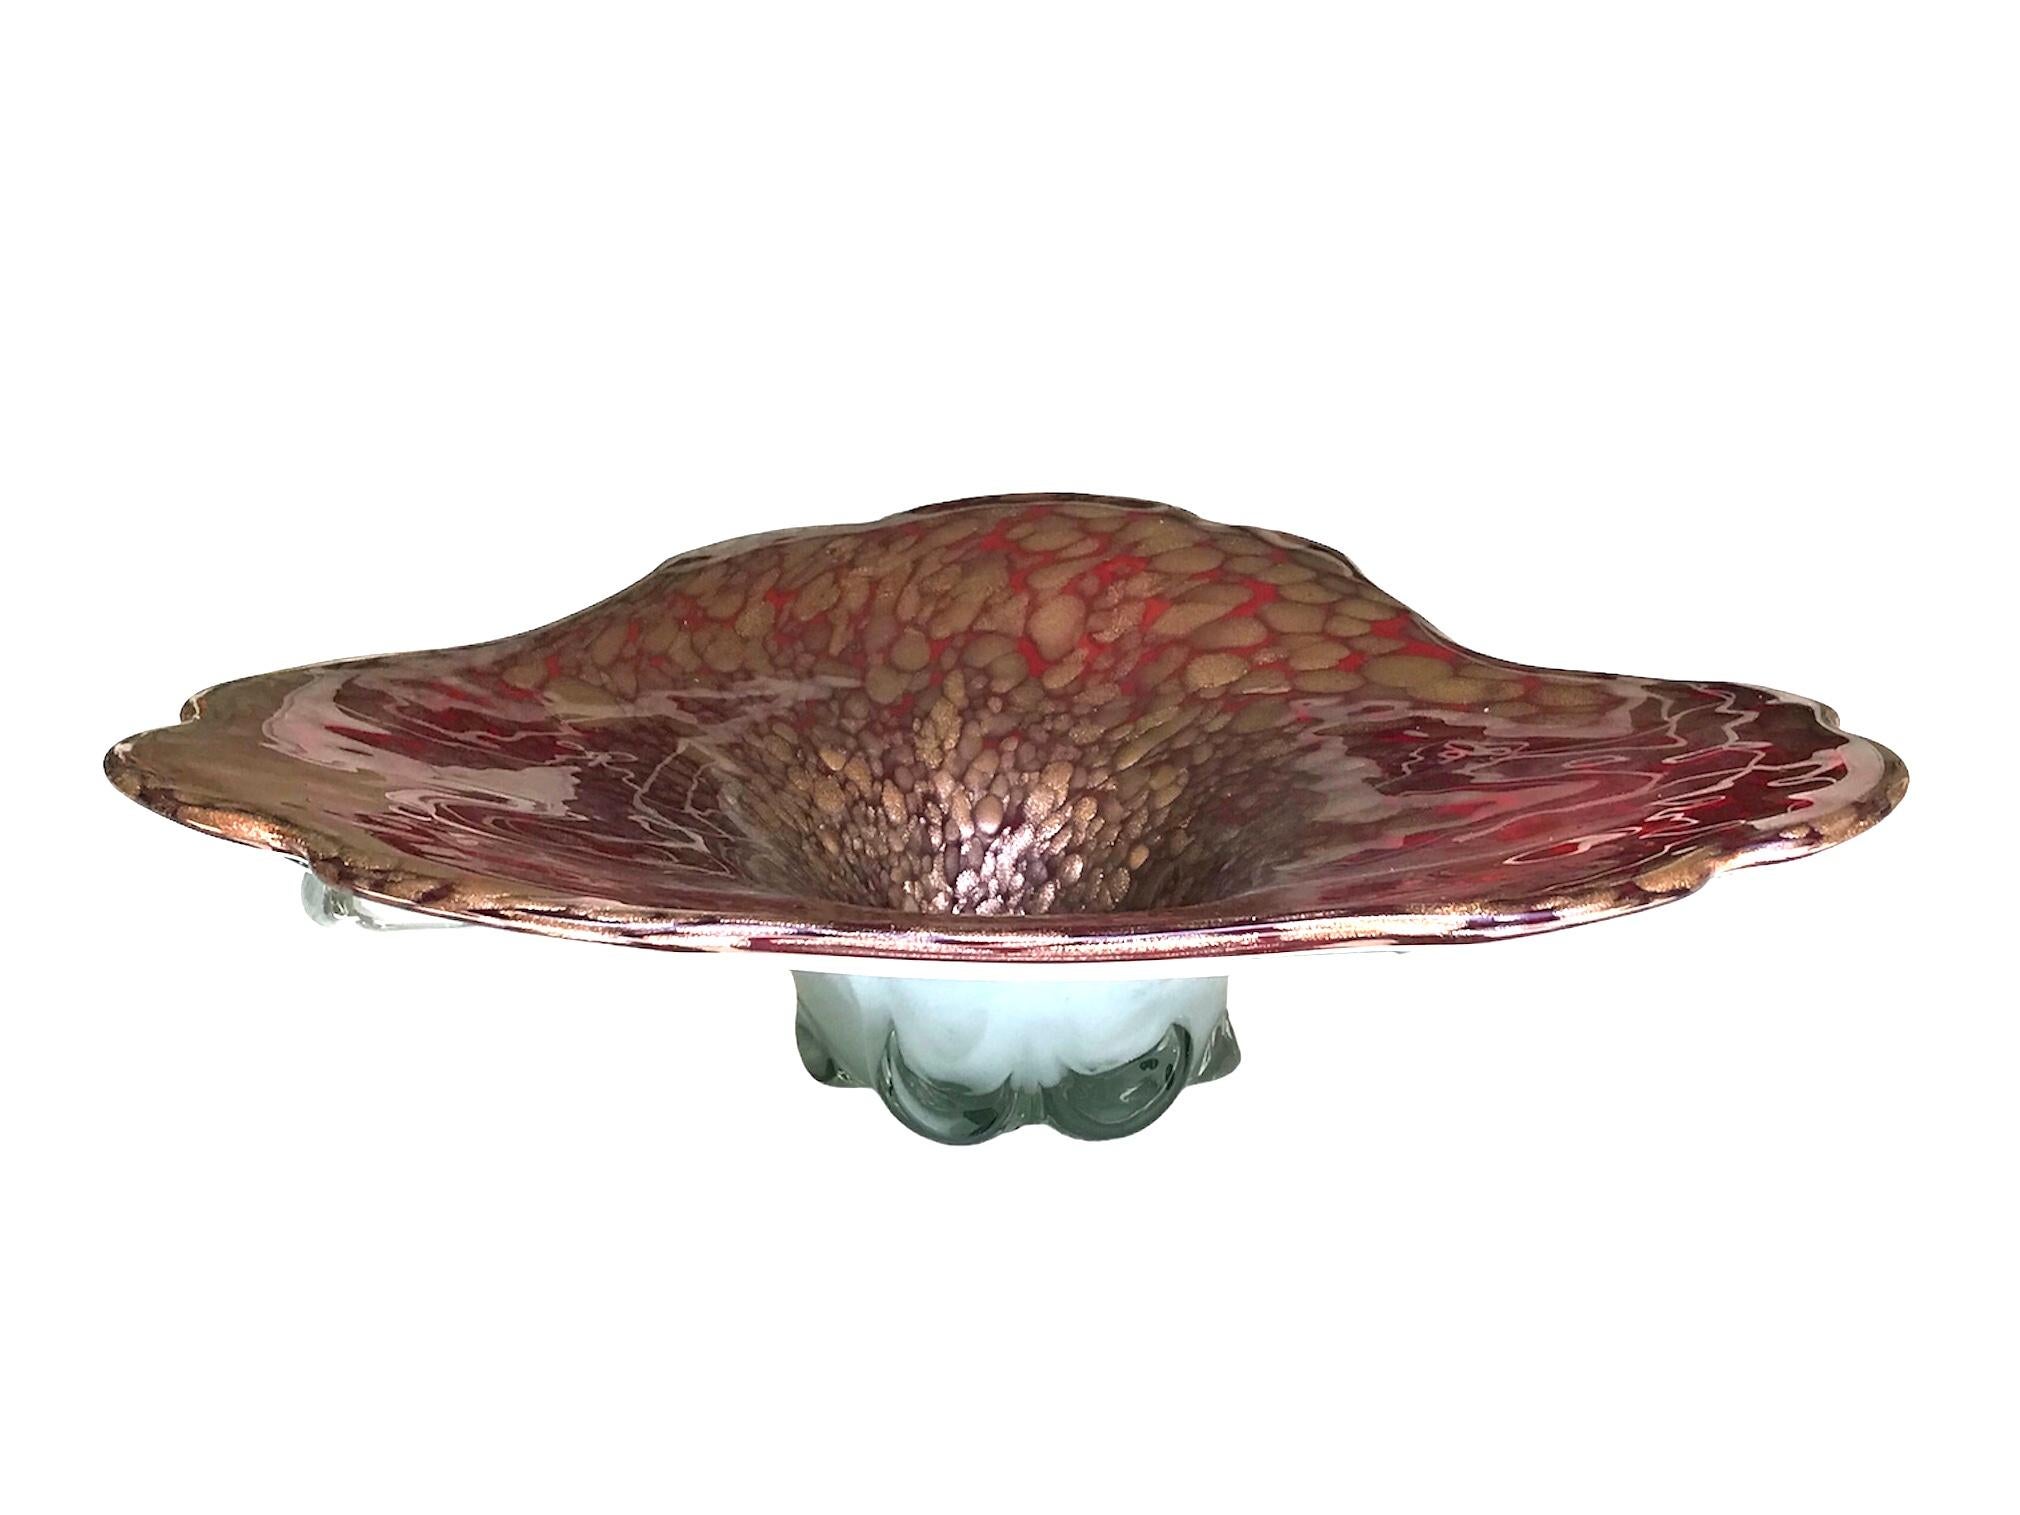 Unusual and large Tricorne shaped pulled cased glass bowl in blood red with gold-copper inclusions on a milky white back. Made in Murano by unknown maker in the 1960s. A midcentury beauty large enough to be used as a centerpiece for your dining